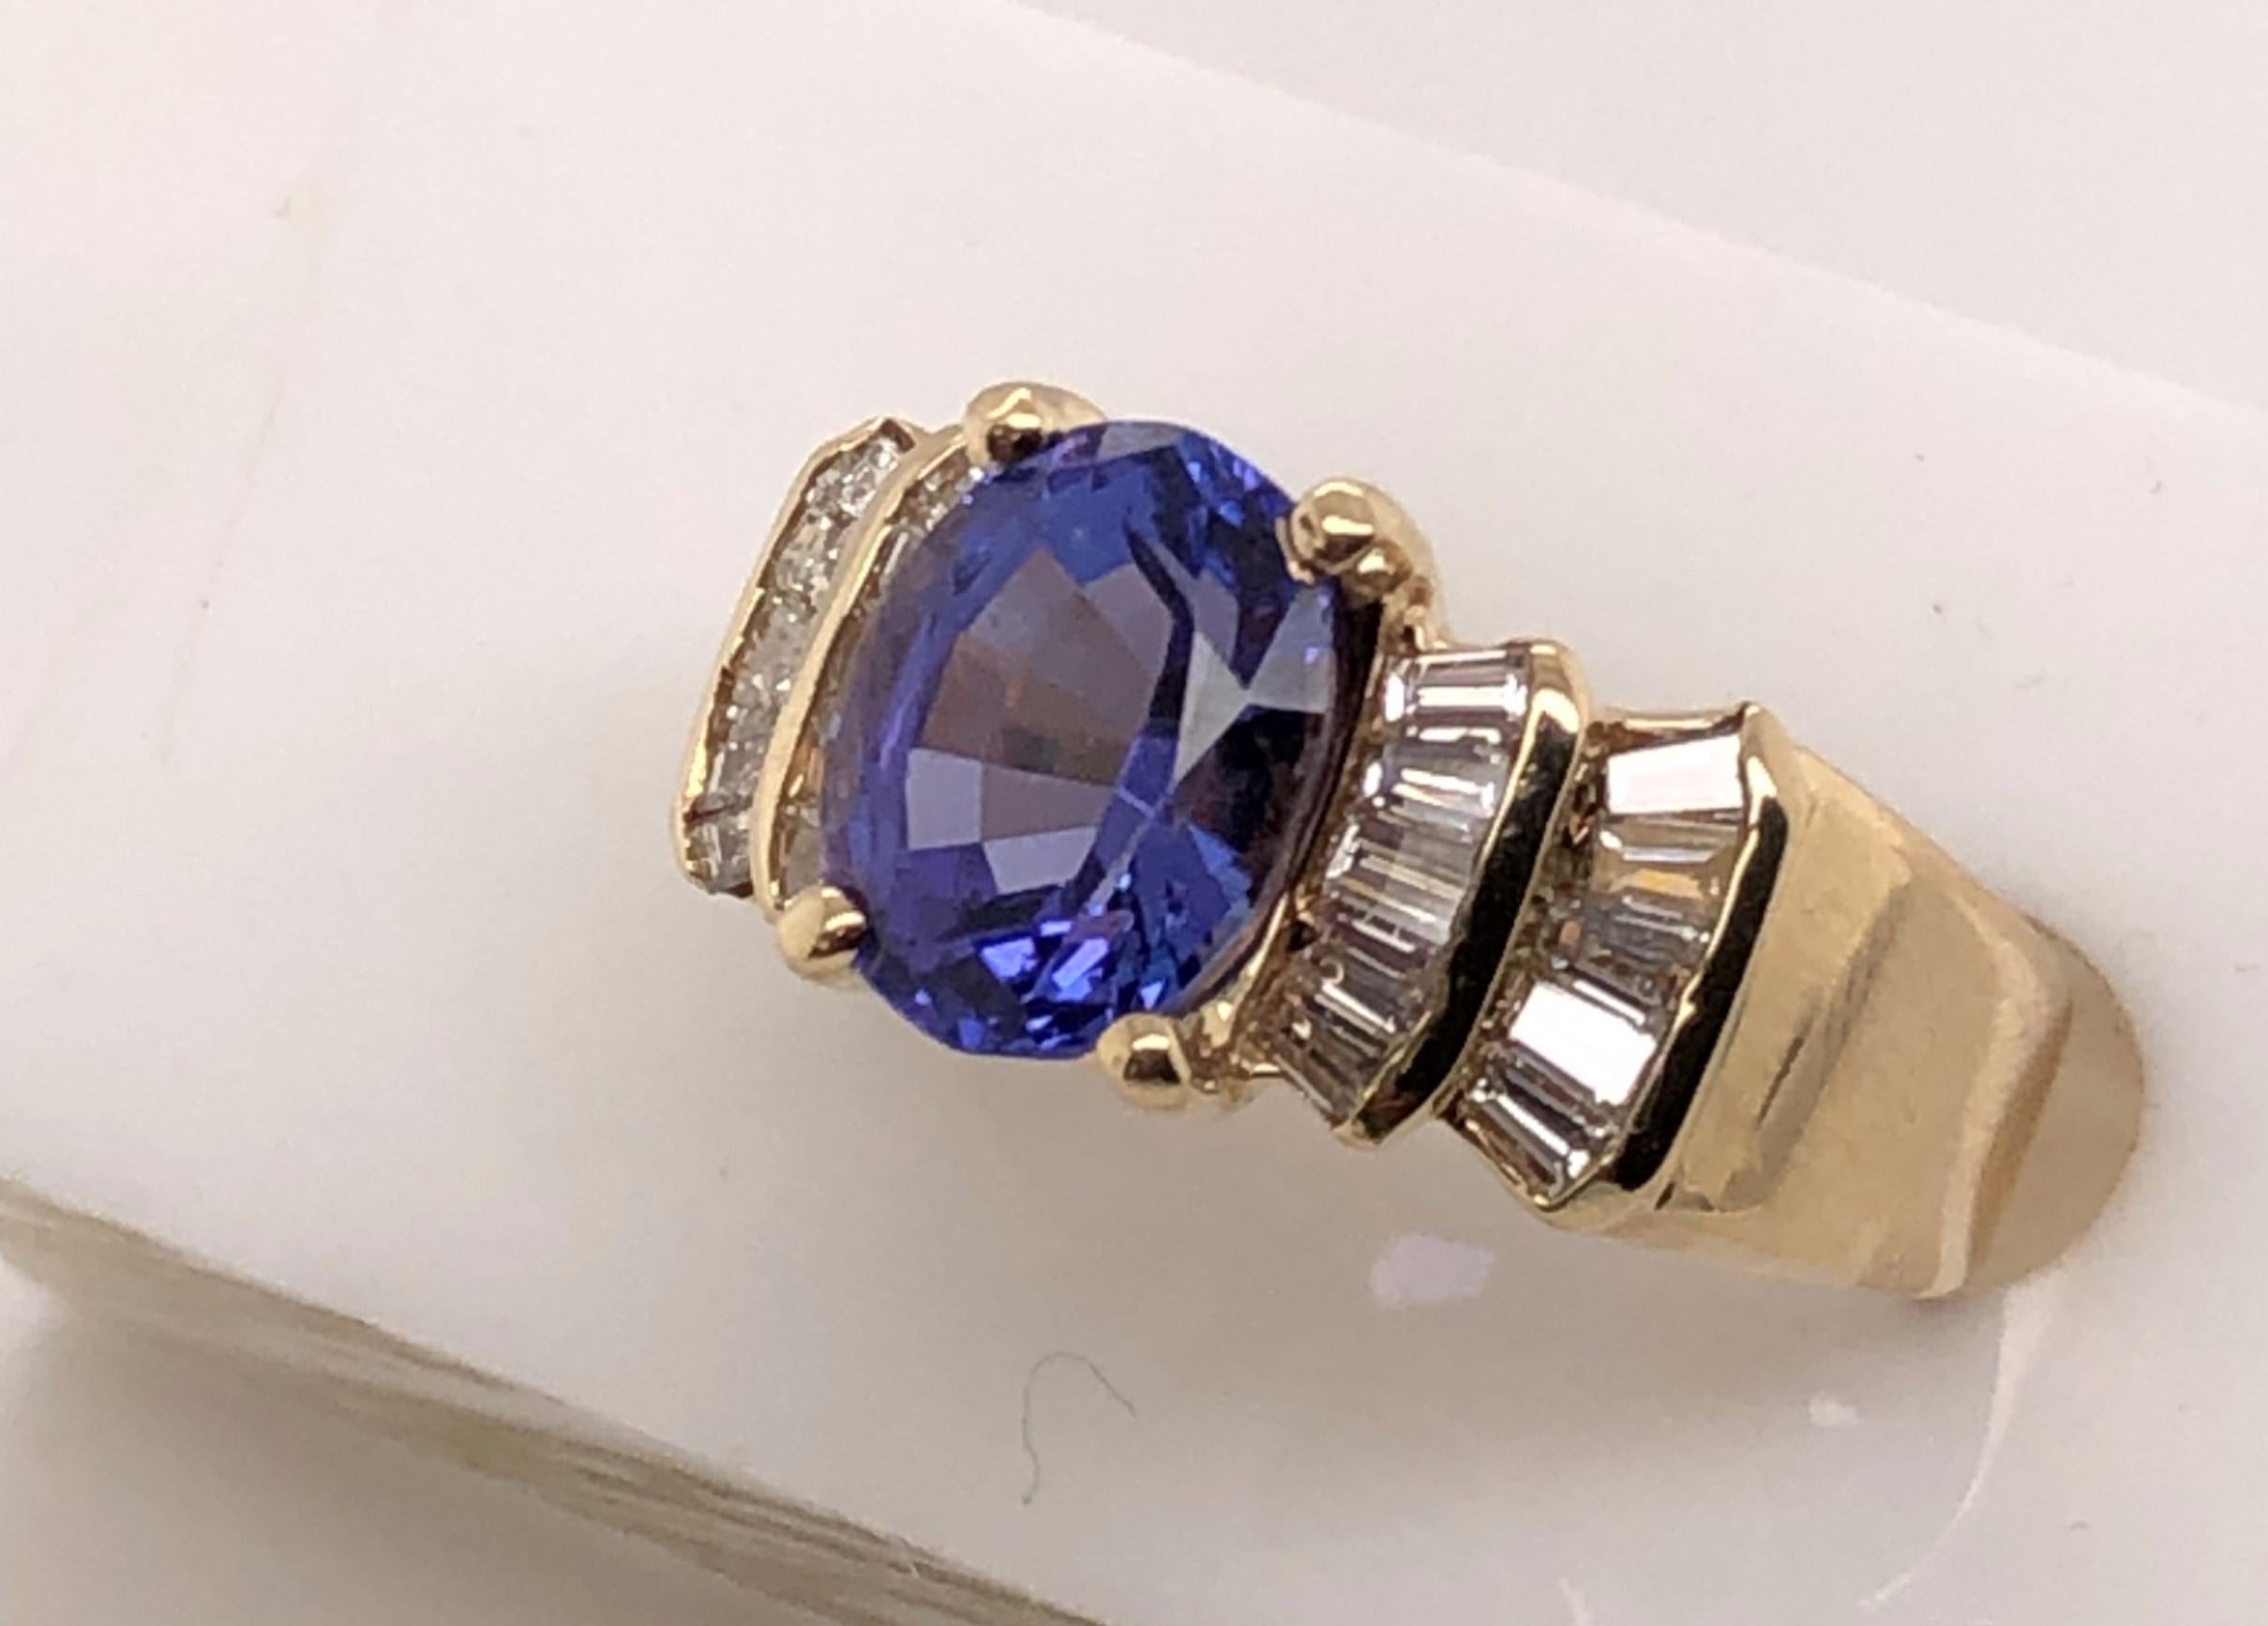 14 Karat Yellow Gold Ring with a 2.75 carat oval Tanzanite centered between two rows of Diamond Baguettes.

The Diamonds are .60 Total Carat Weight J-K color SI-1 SI-2 Clarity.

The Tanzanite measures approximately 1/4 inch x 3/8 inch.  It sits 1/4